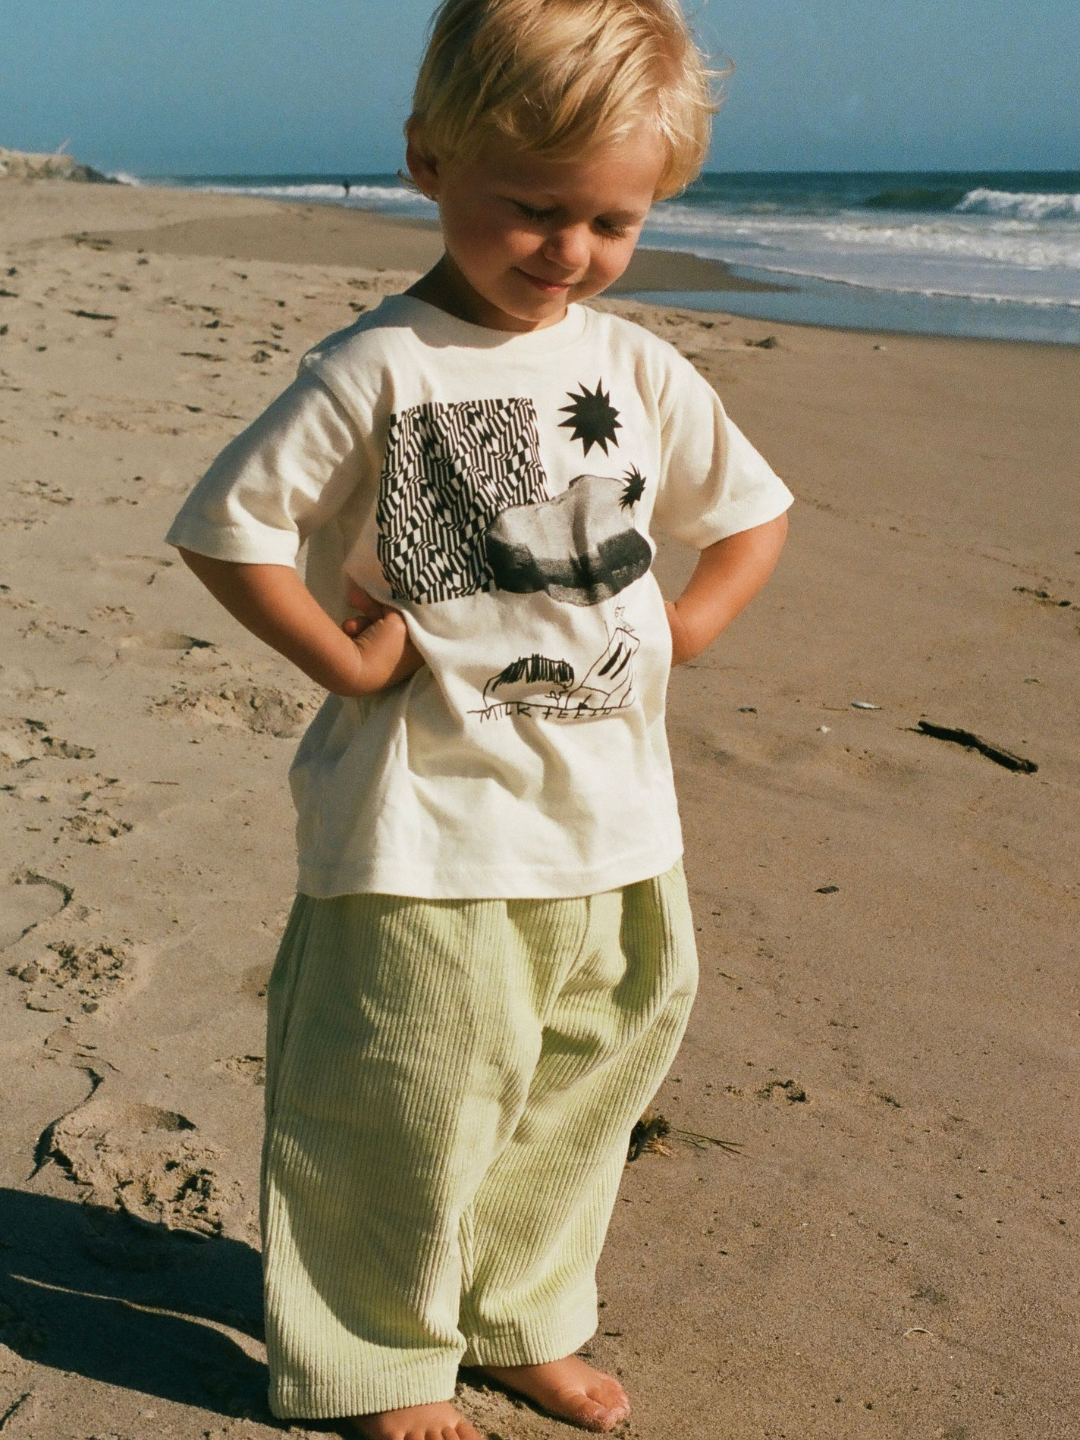 A child on a beach wearing a kids' tee shirt in cream, printed in black with stars, zigzags, a PBJ sandwich, a toaster and the words Milk Teeth